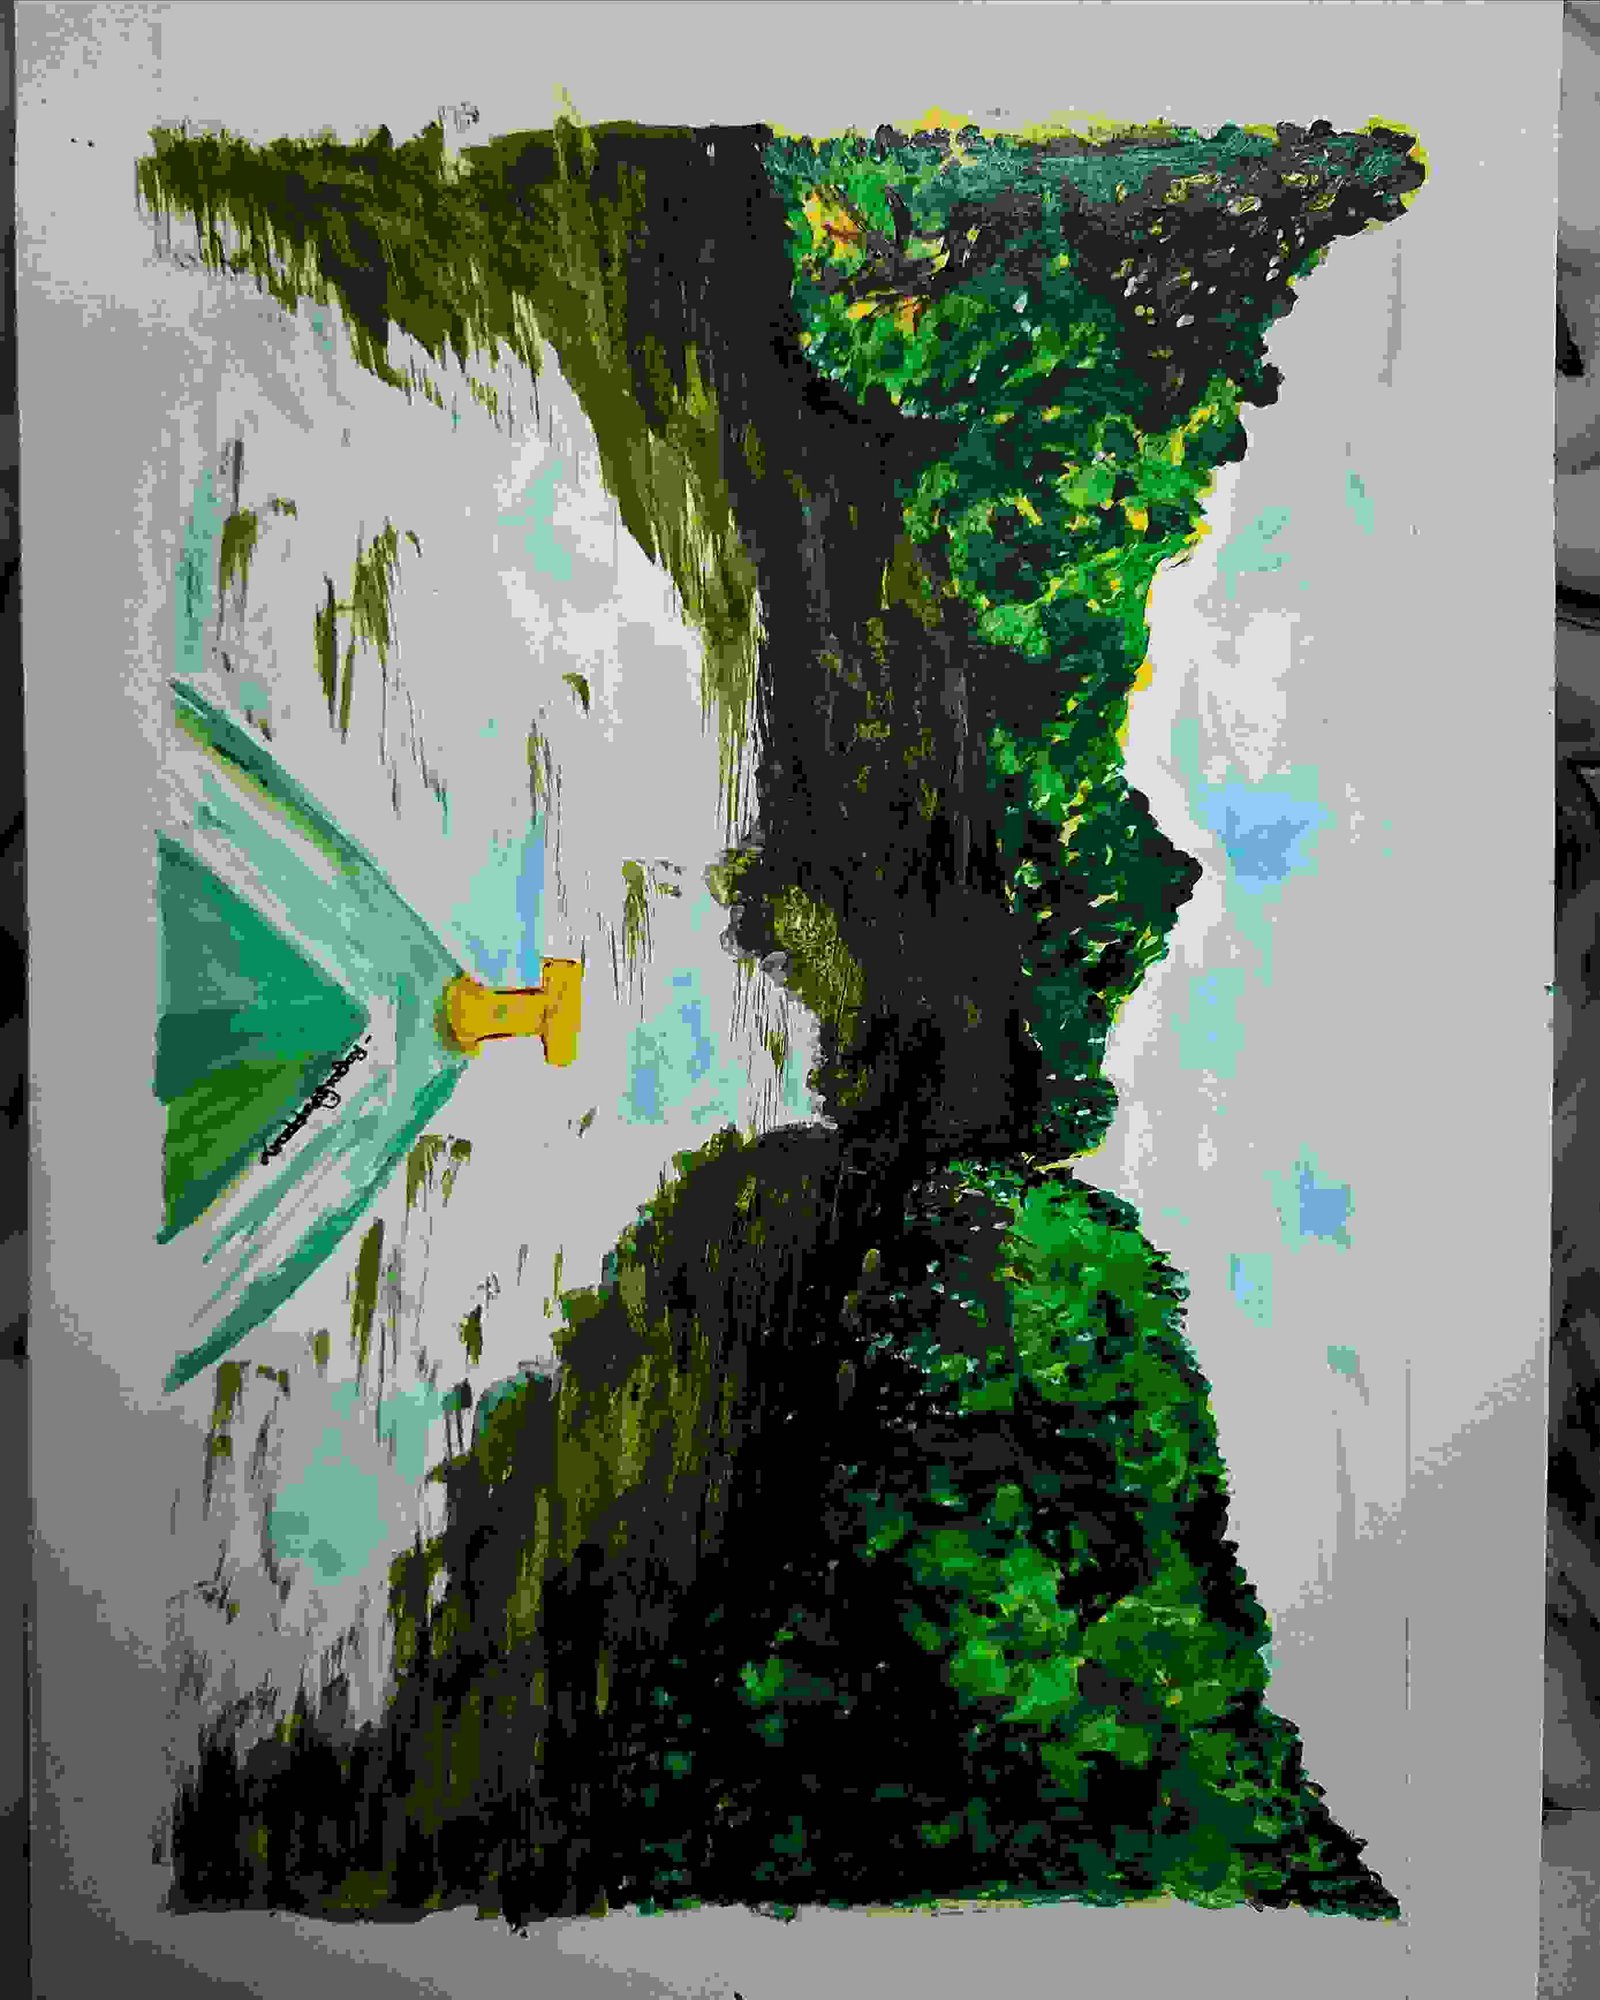 Painting Of Pichavaram Mangrove Forest In Acrylic Painting Size A3 Sq 